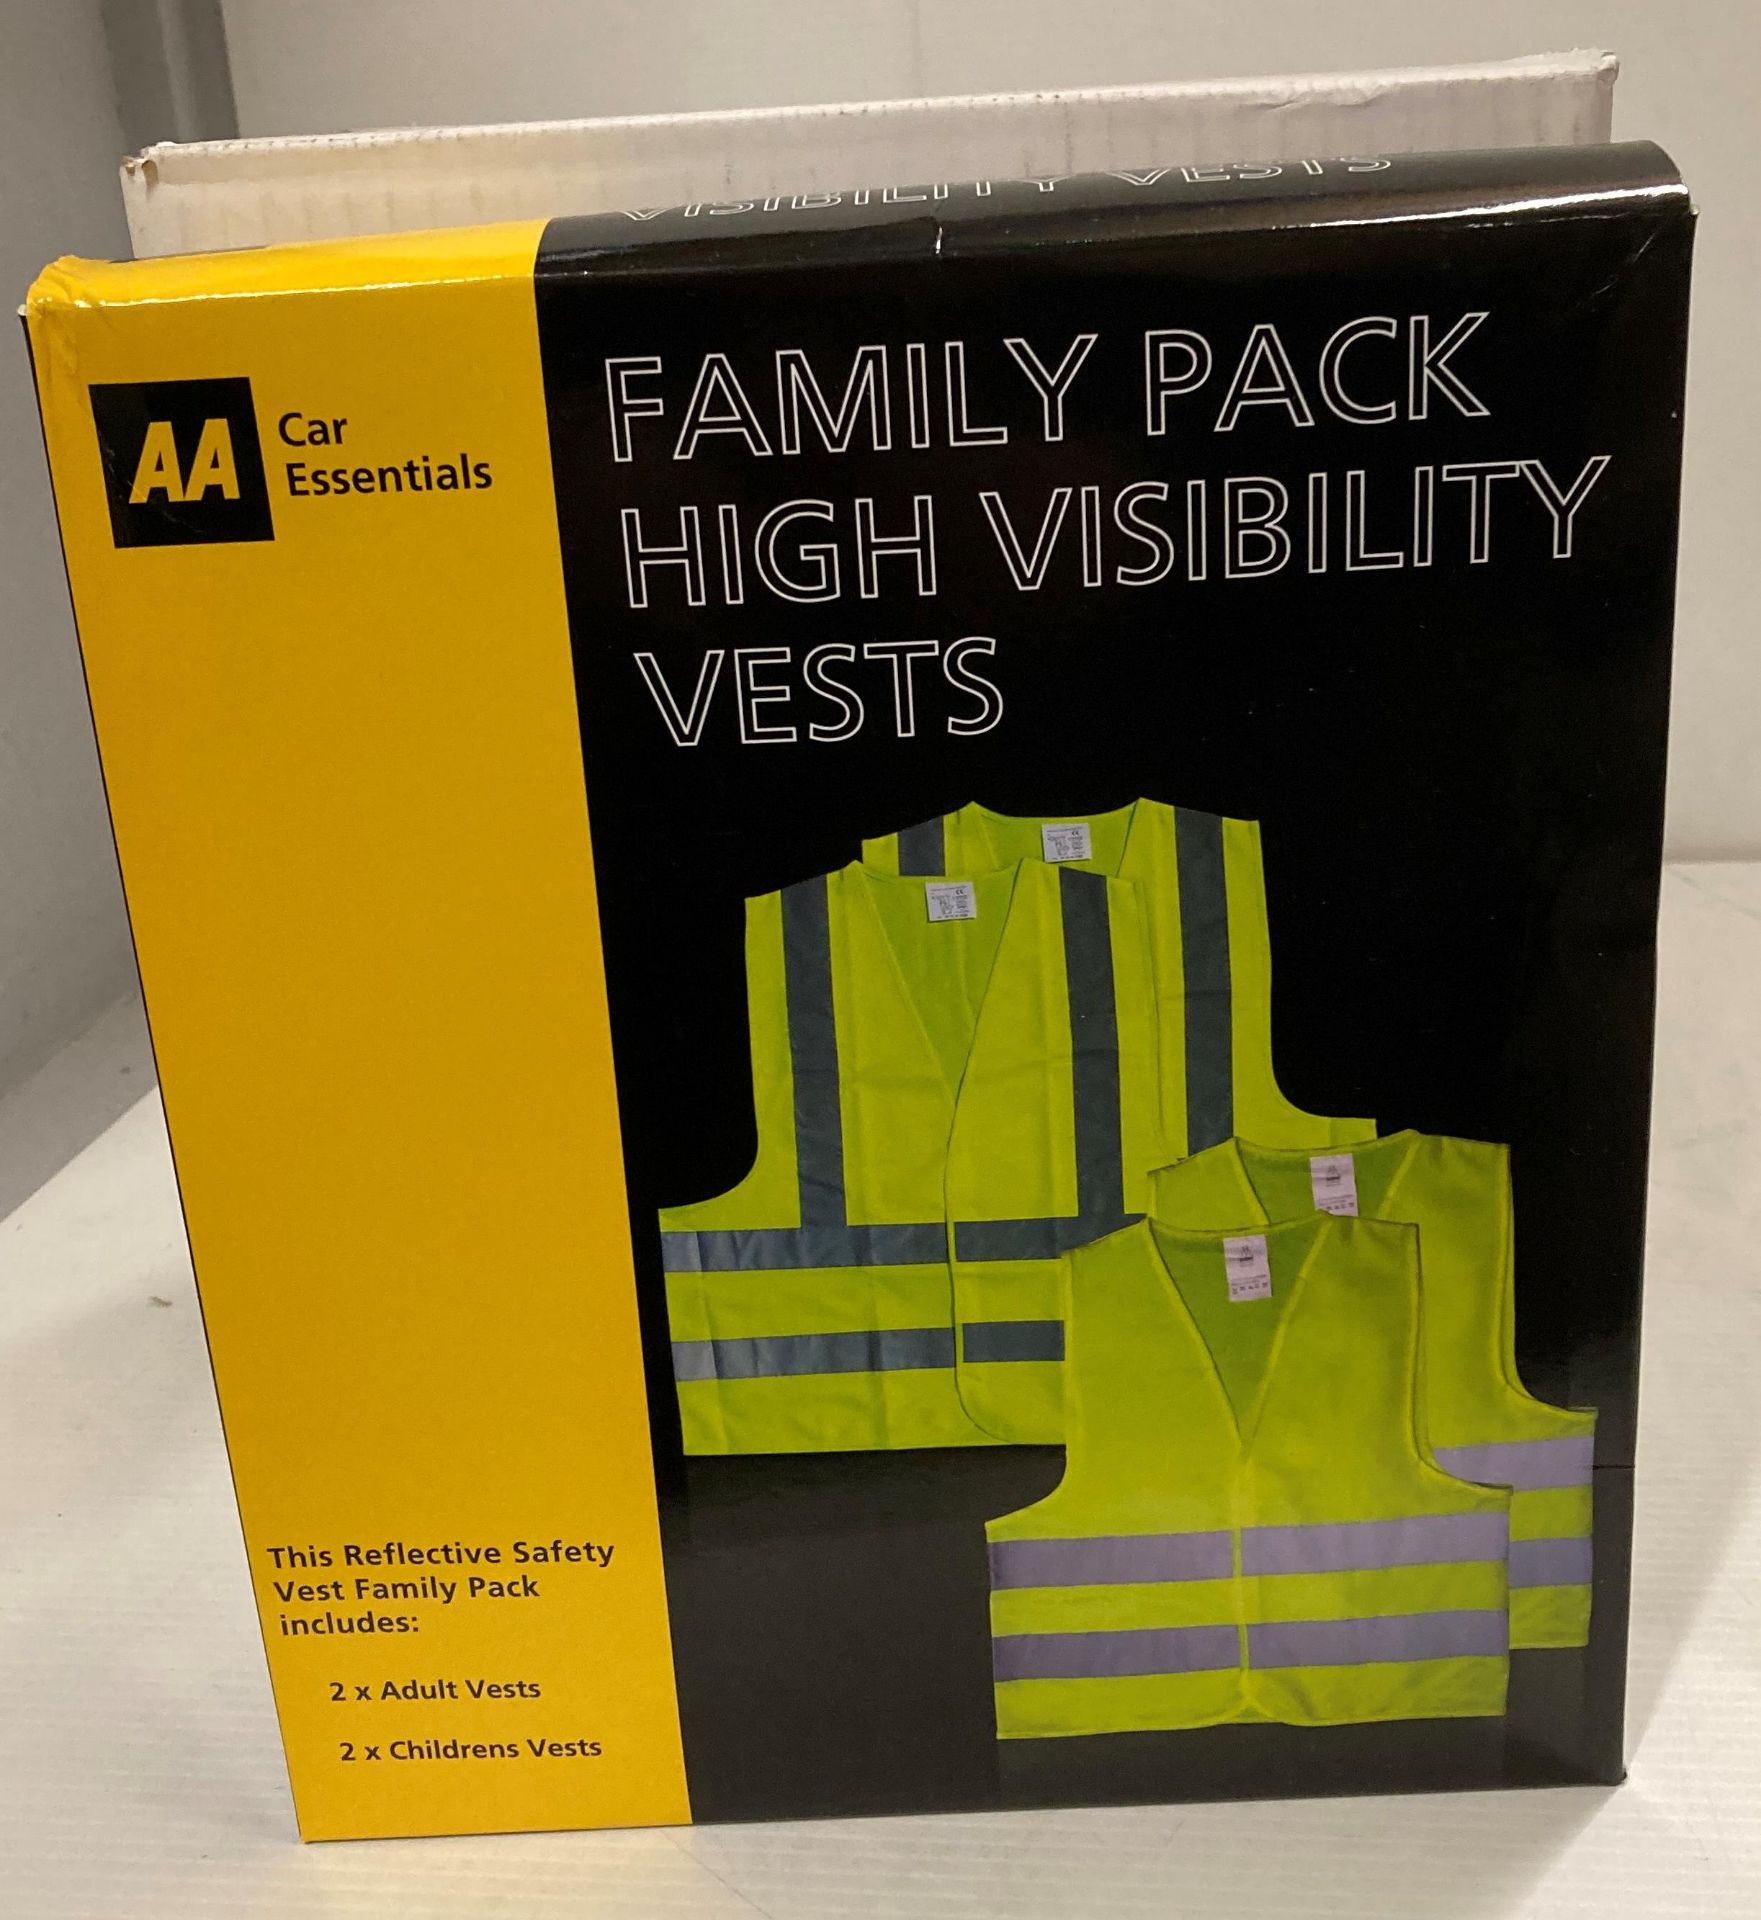 8 packs of AA family pack high visibility vests (2 outer boxes) (U12)